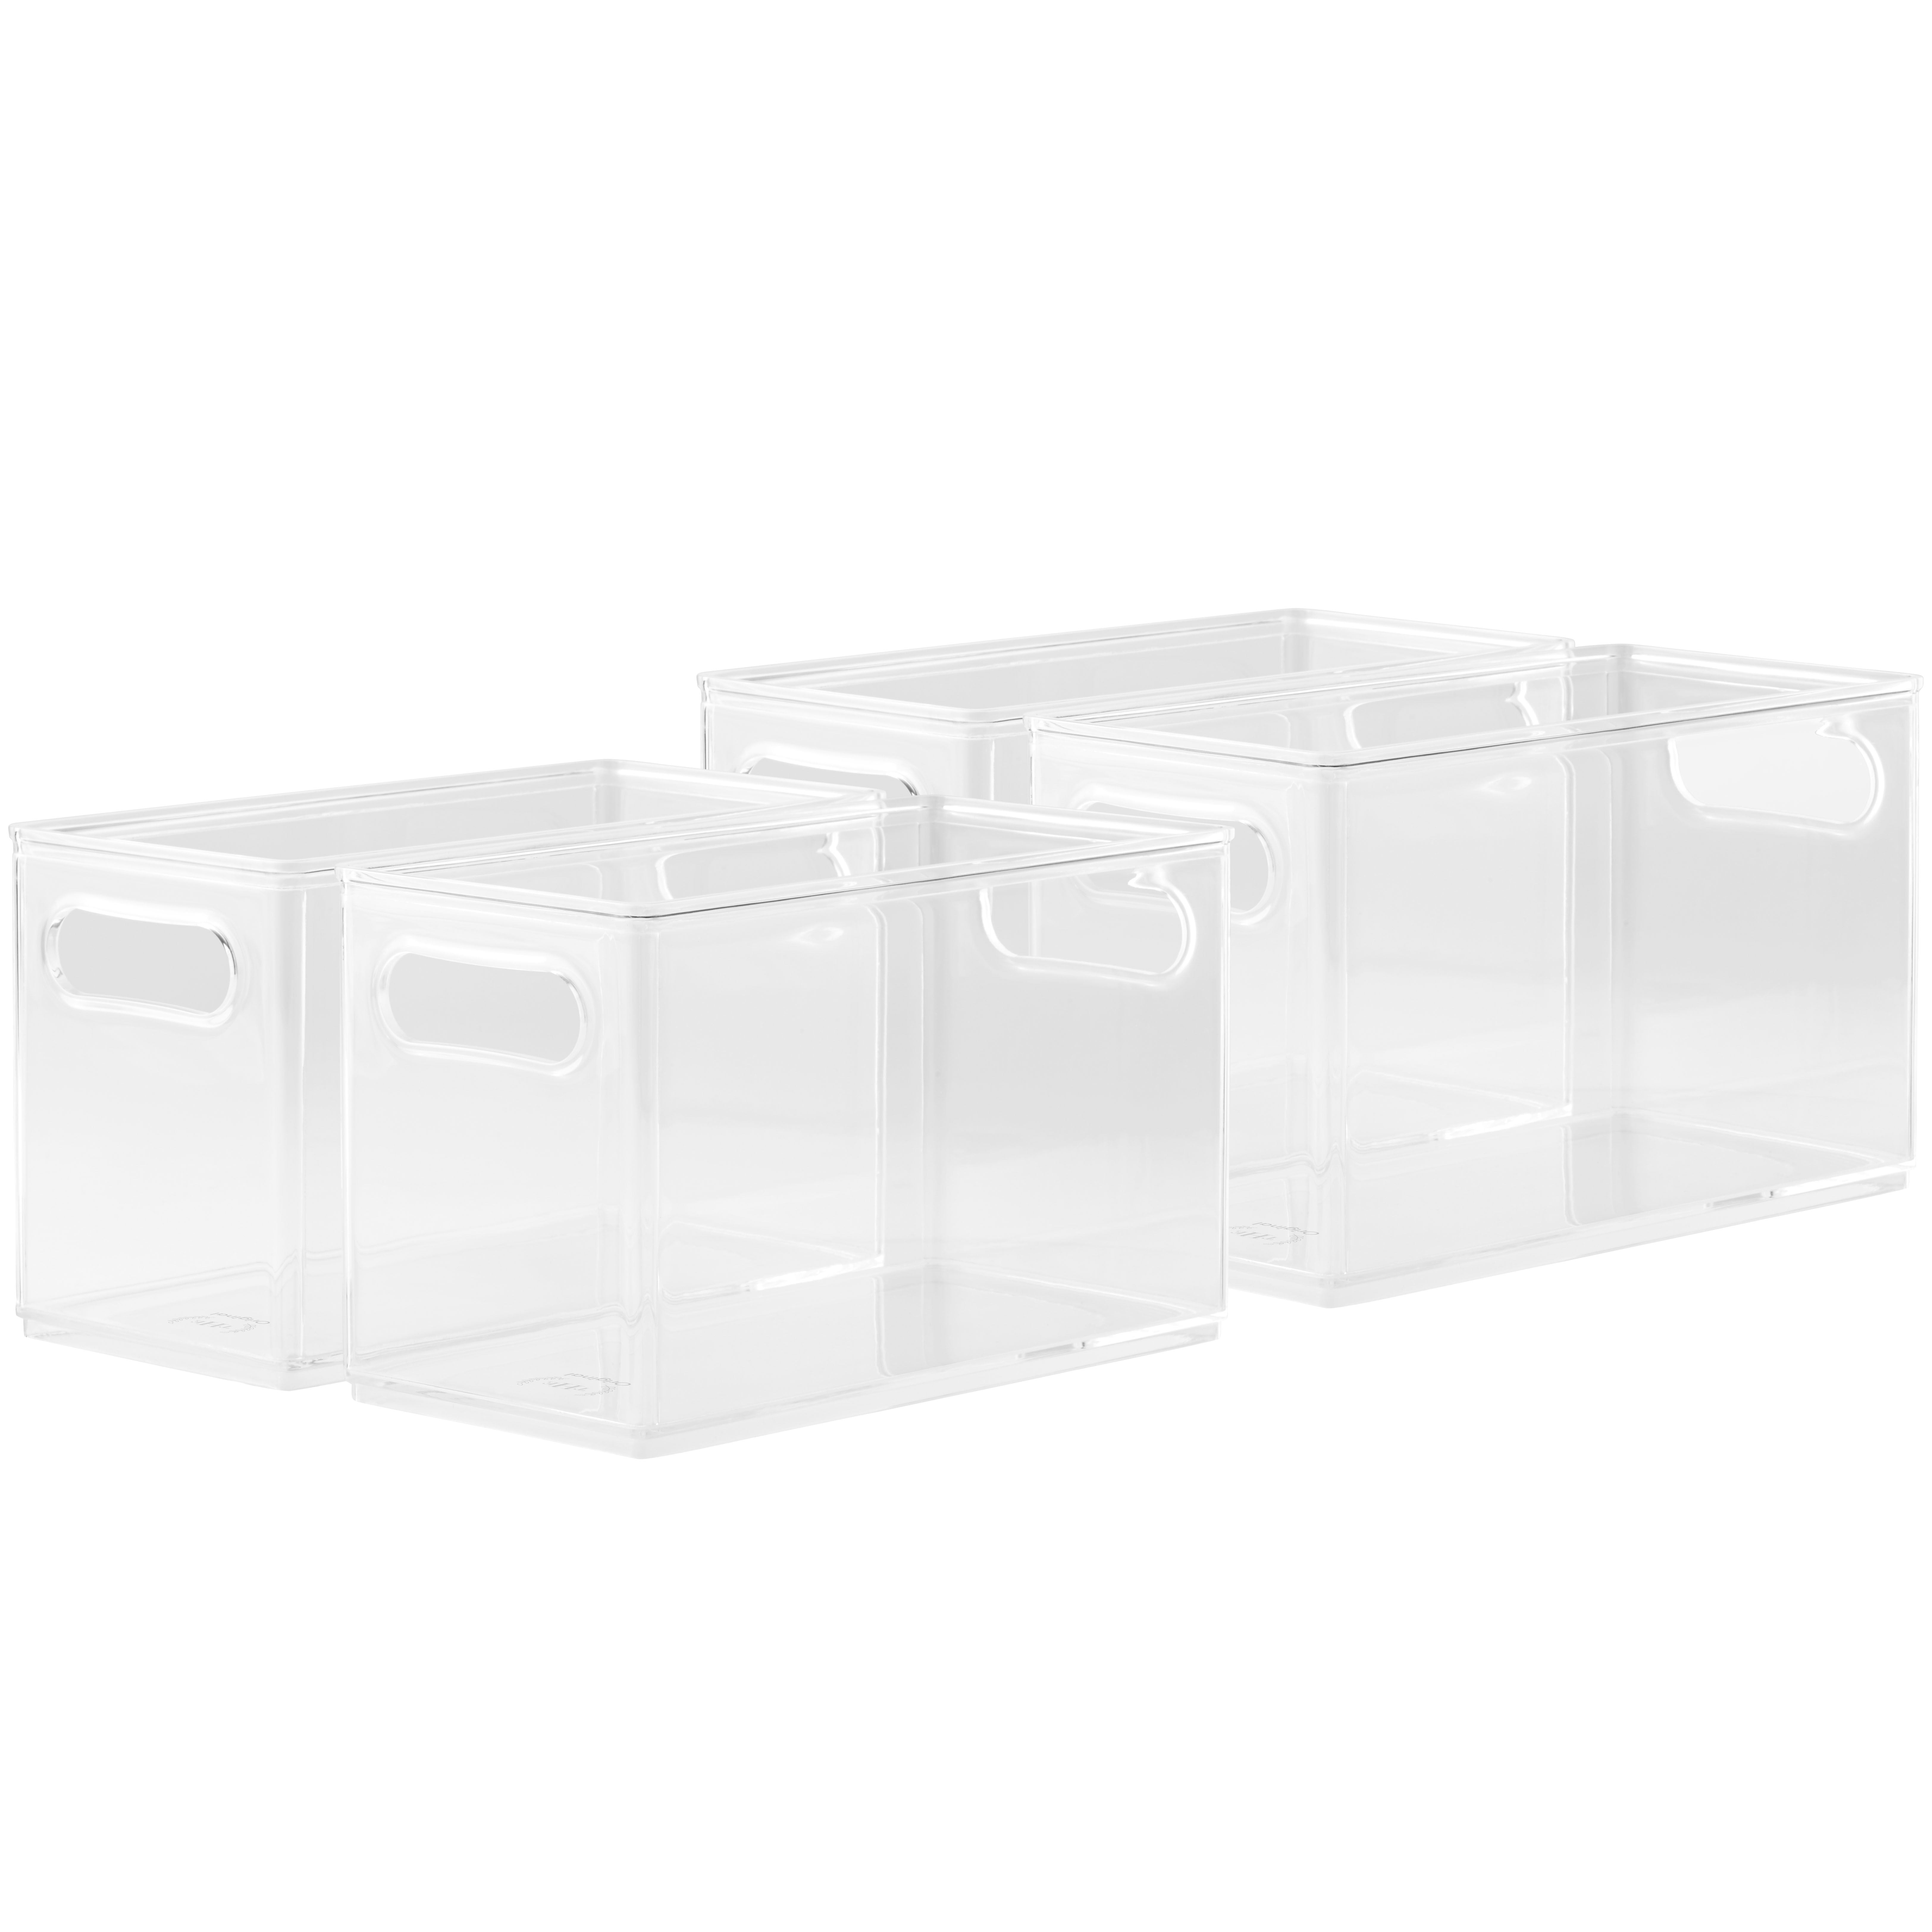  Qilinba Set Of 8 Stackable Pantry Organizer Bins, Clear Plastic  Storage Bins for Home Edit Fridge Cabinet Organizing Storage Containers (4  Large and 4 Medium) : Home & Kitchen